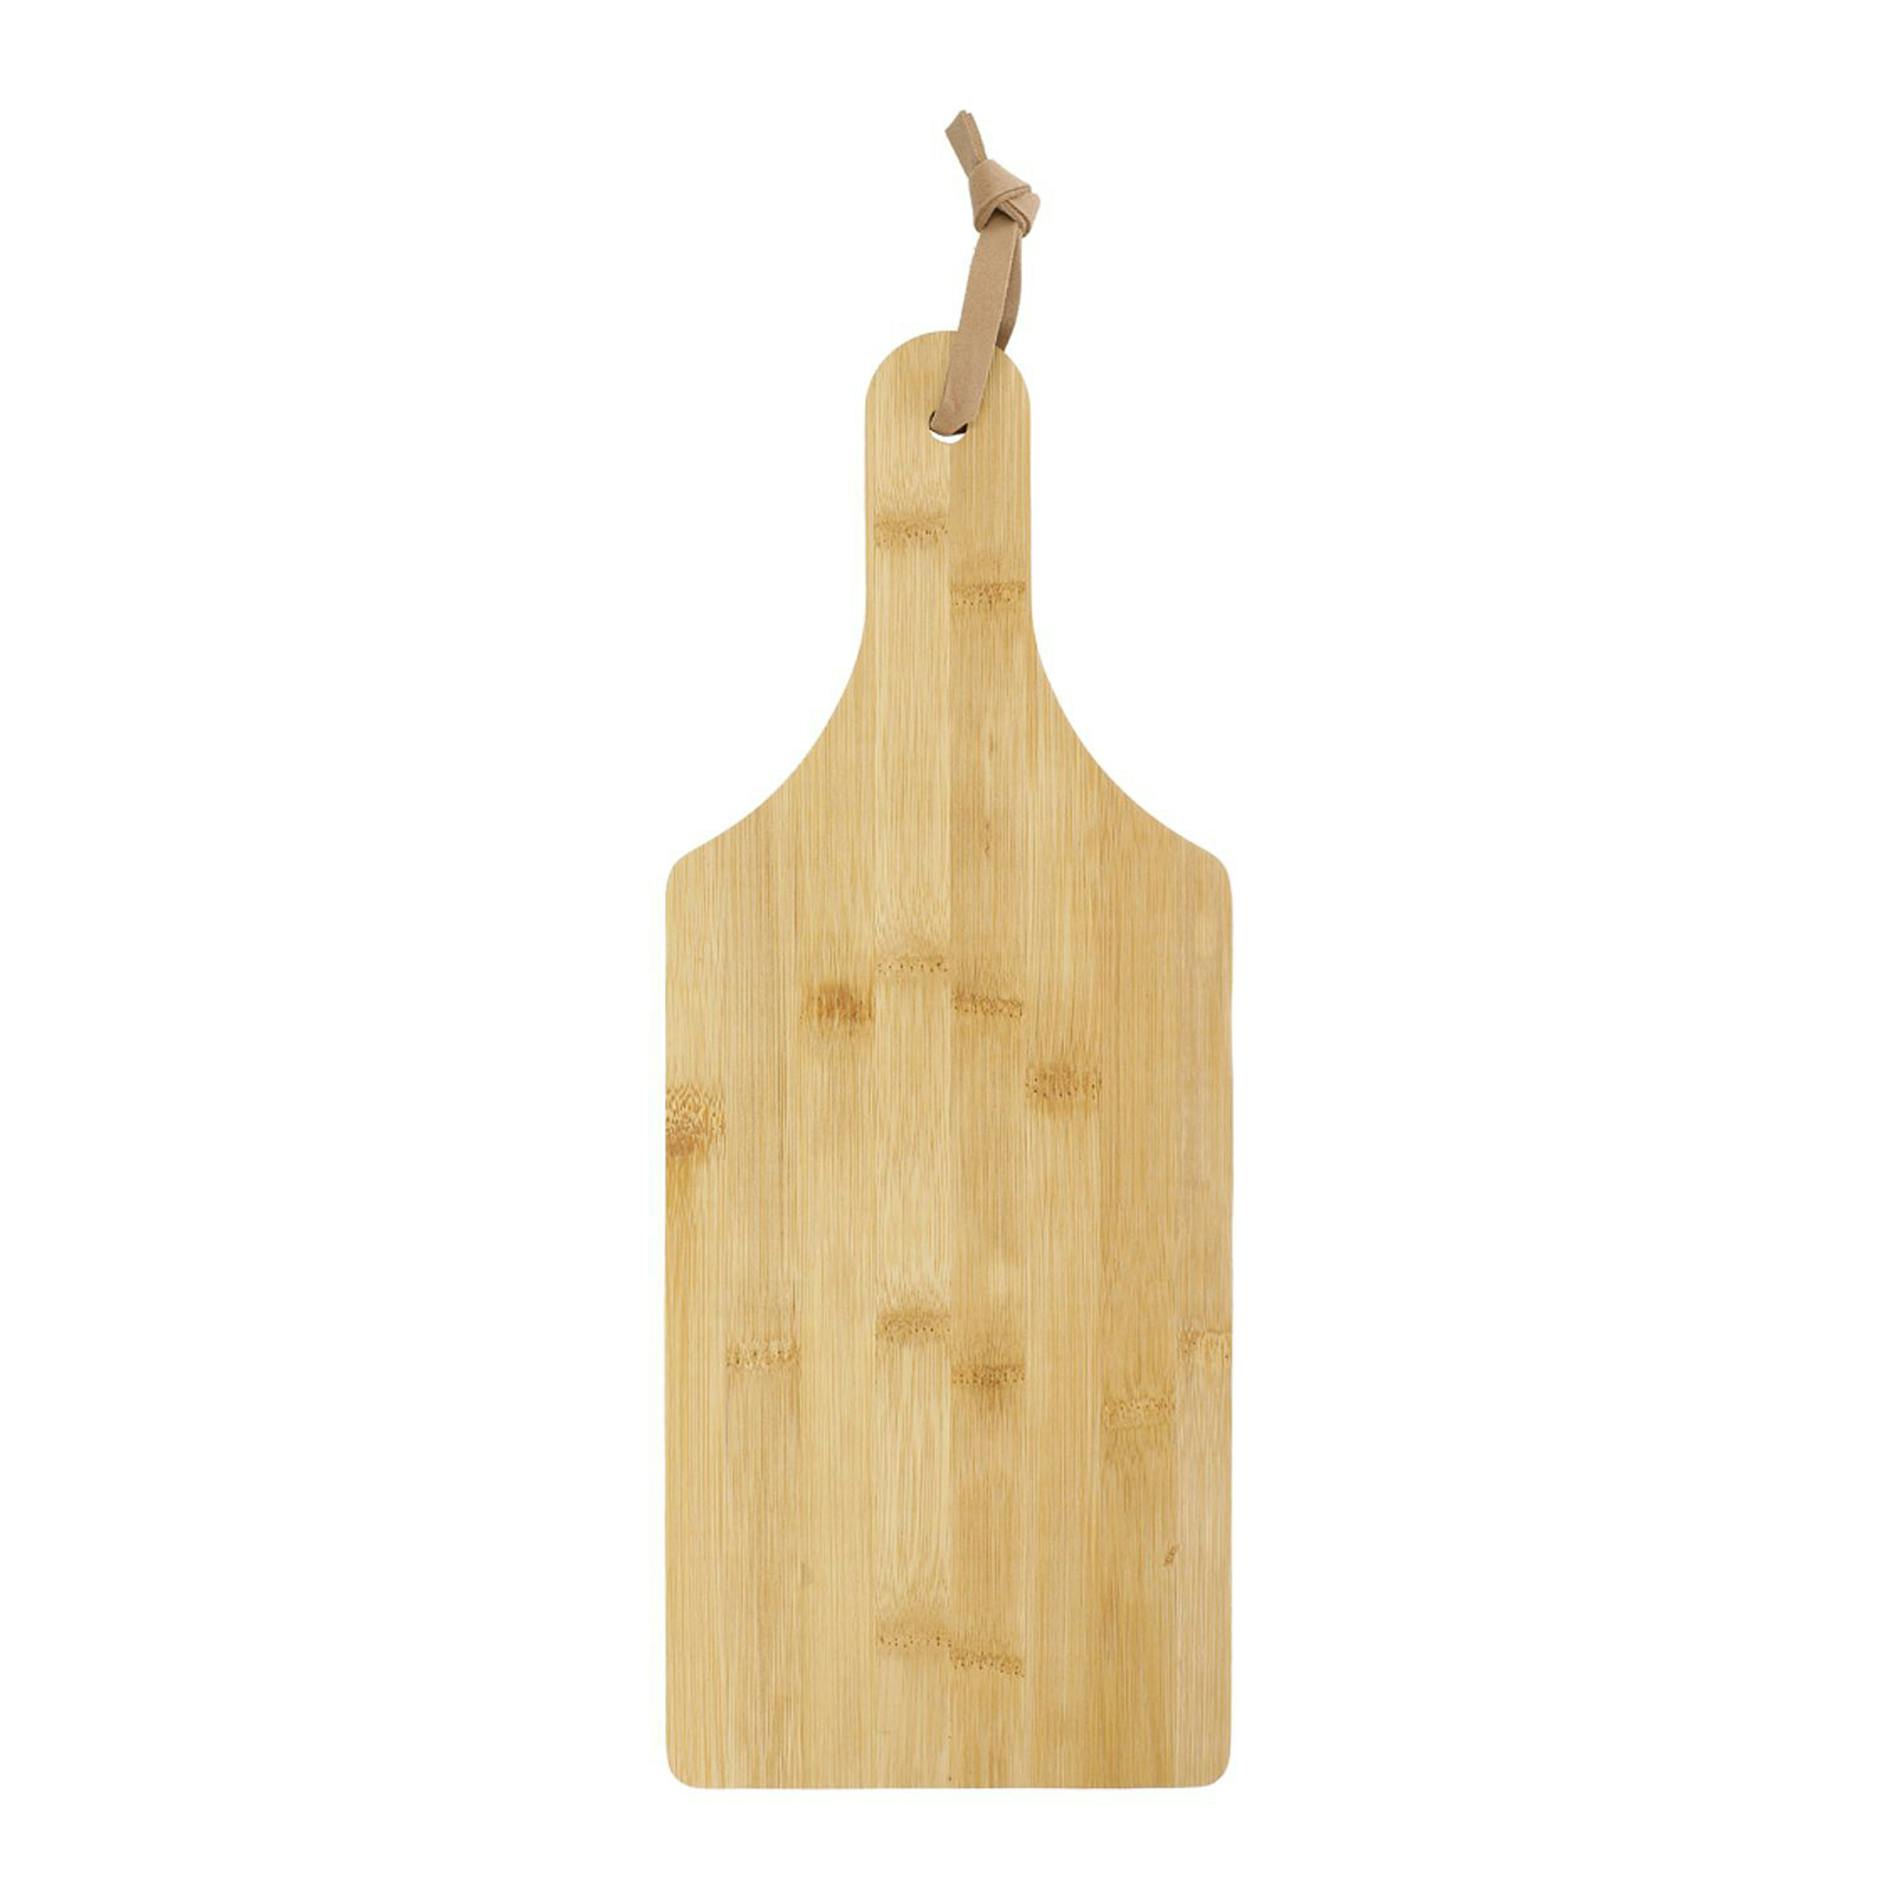 Bamboo Cutting Board with Handle - additional Image 1